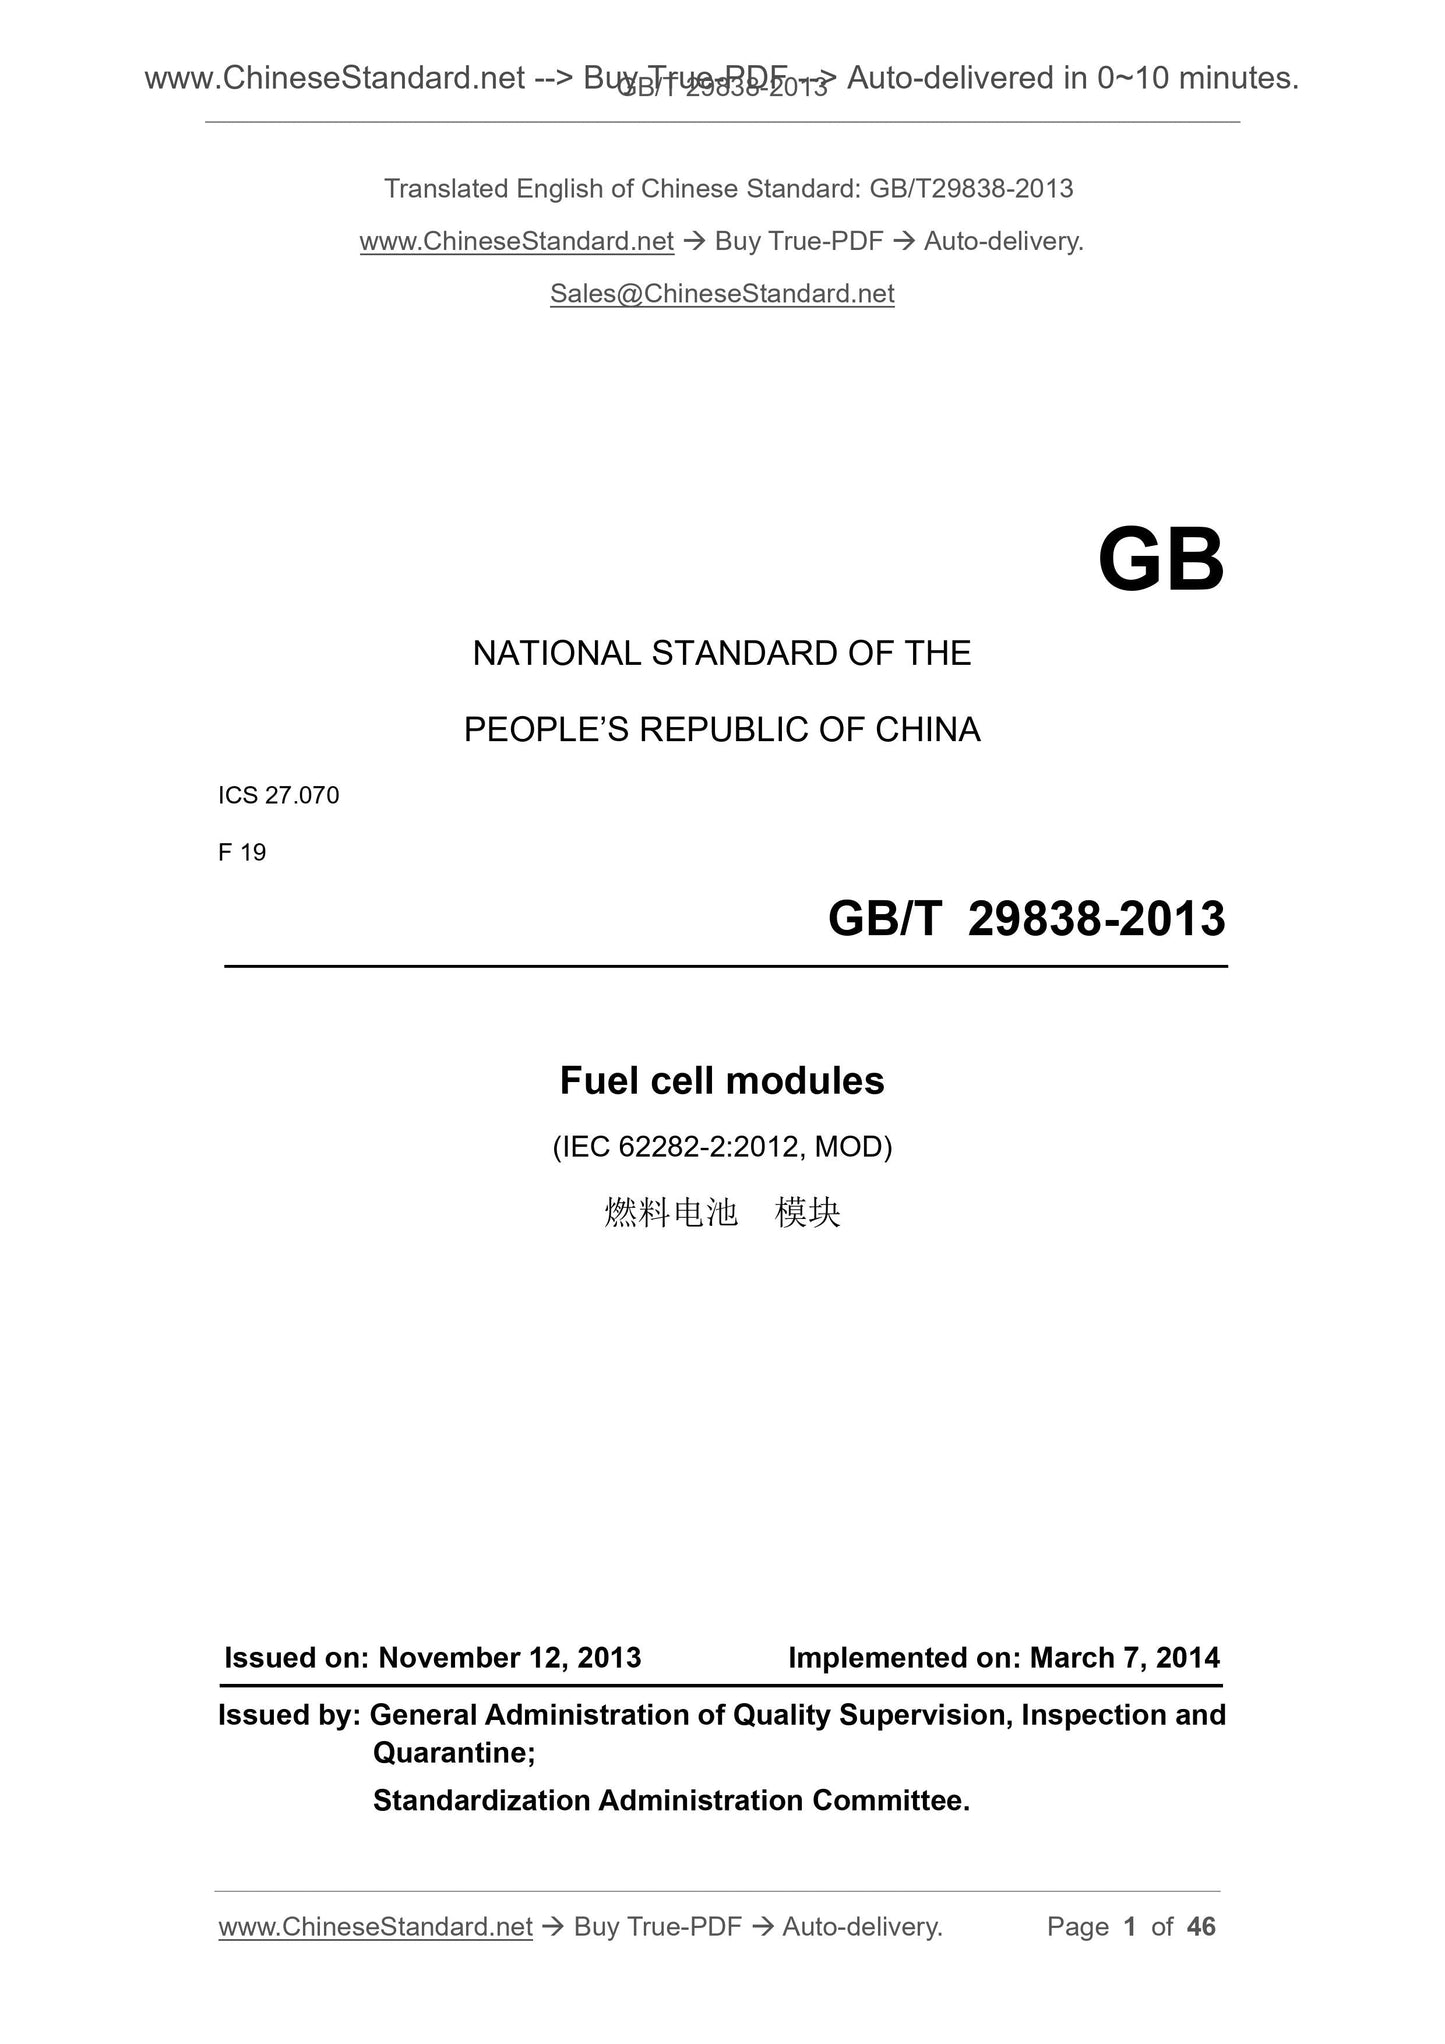 GB/T 29838-2013 Page 1